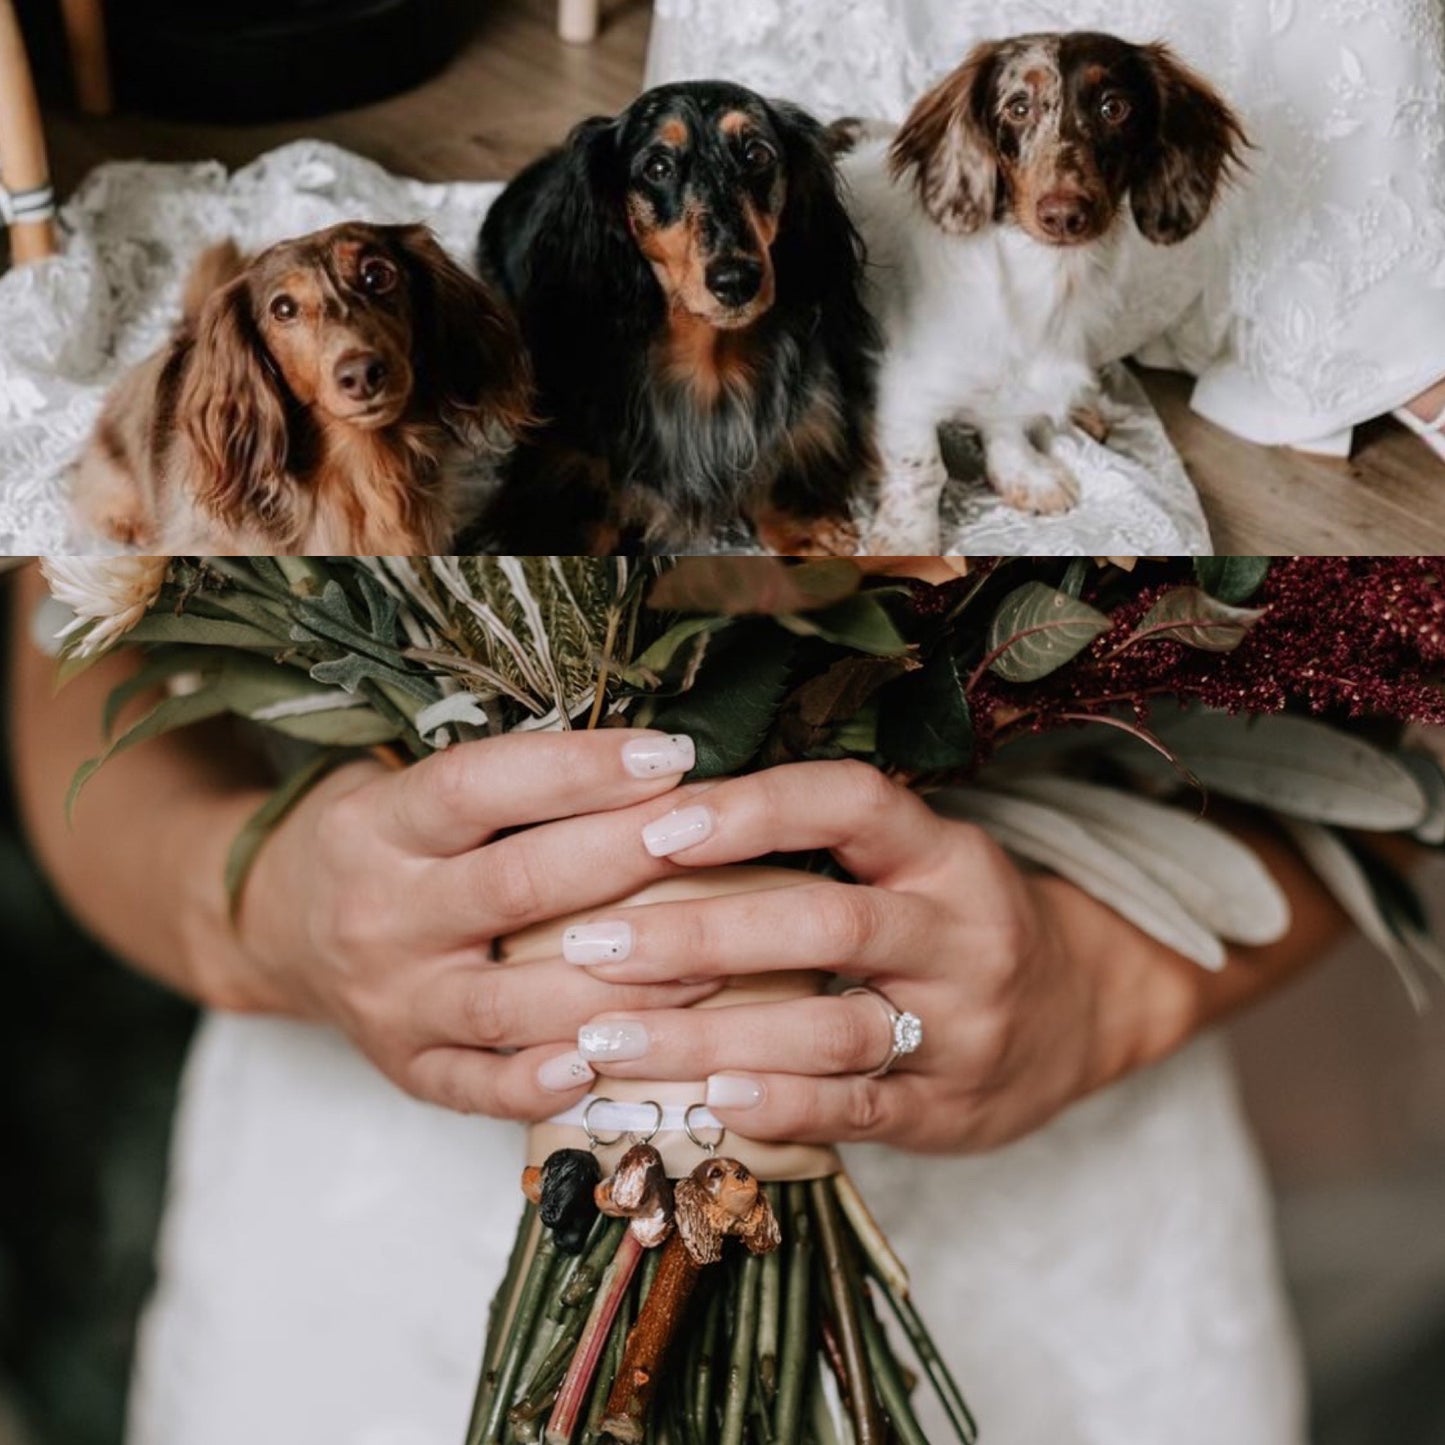 Custom pet bridal bouquet charm photo from a wedding day, featuring 3 dachshunds..